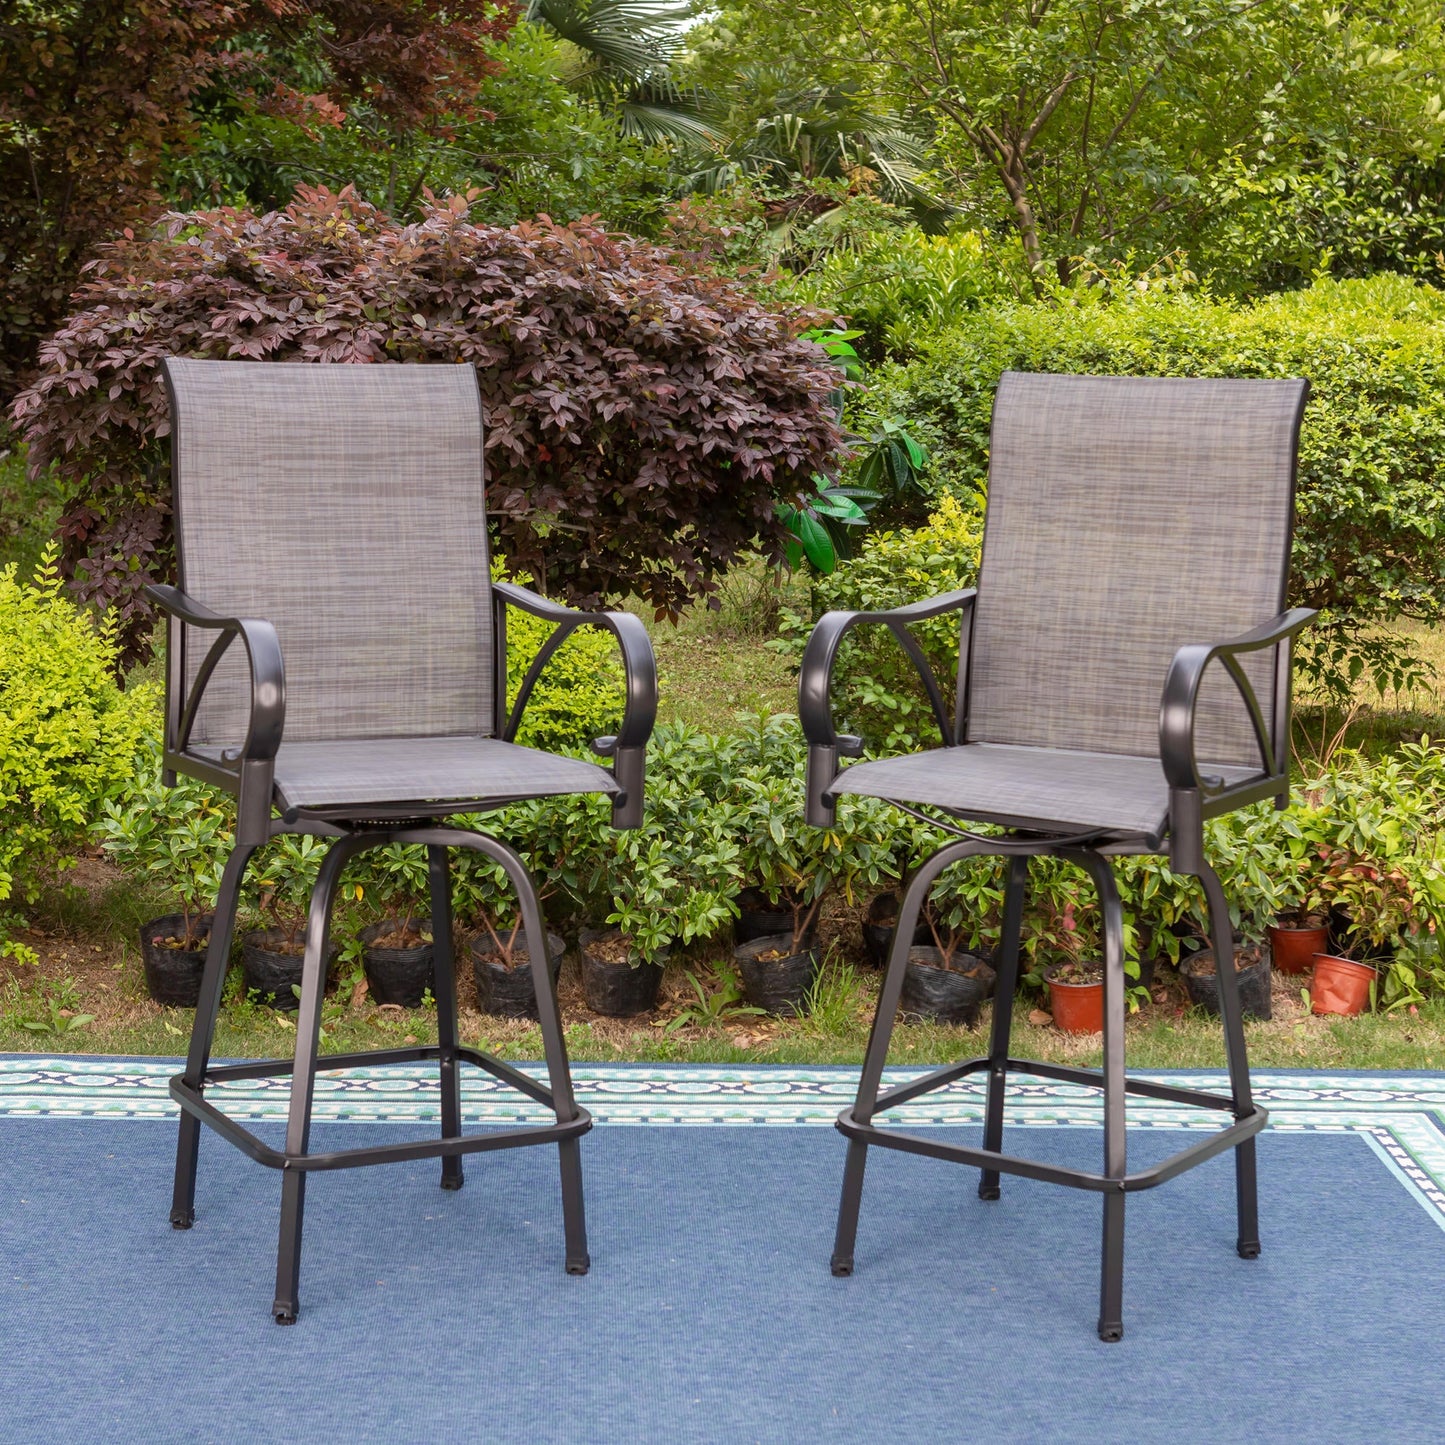 Sophia & William Set of 2 Outdoor Swivel Metal Bar Stools Patio Height Chairs - Gray